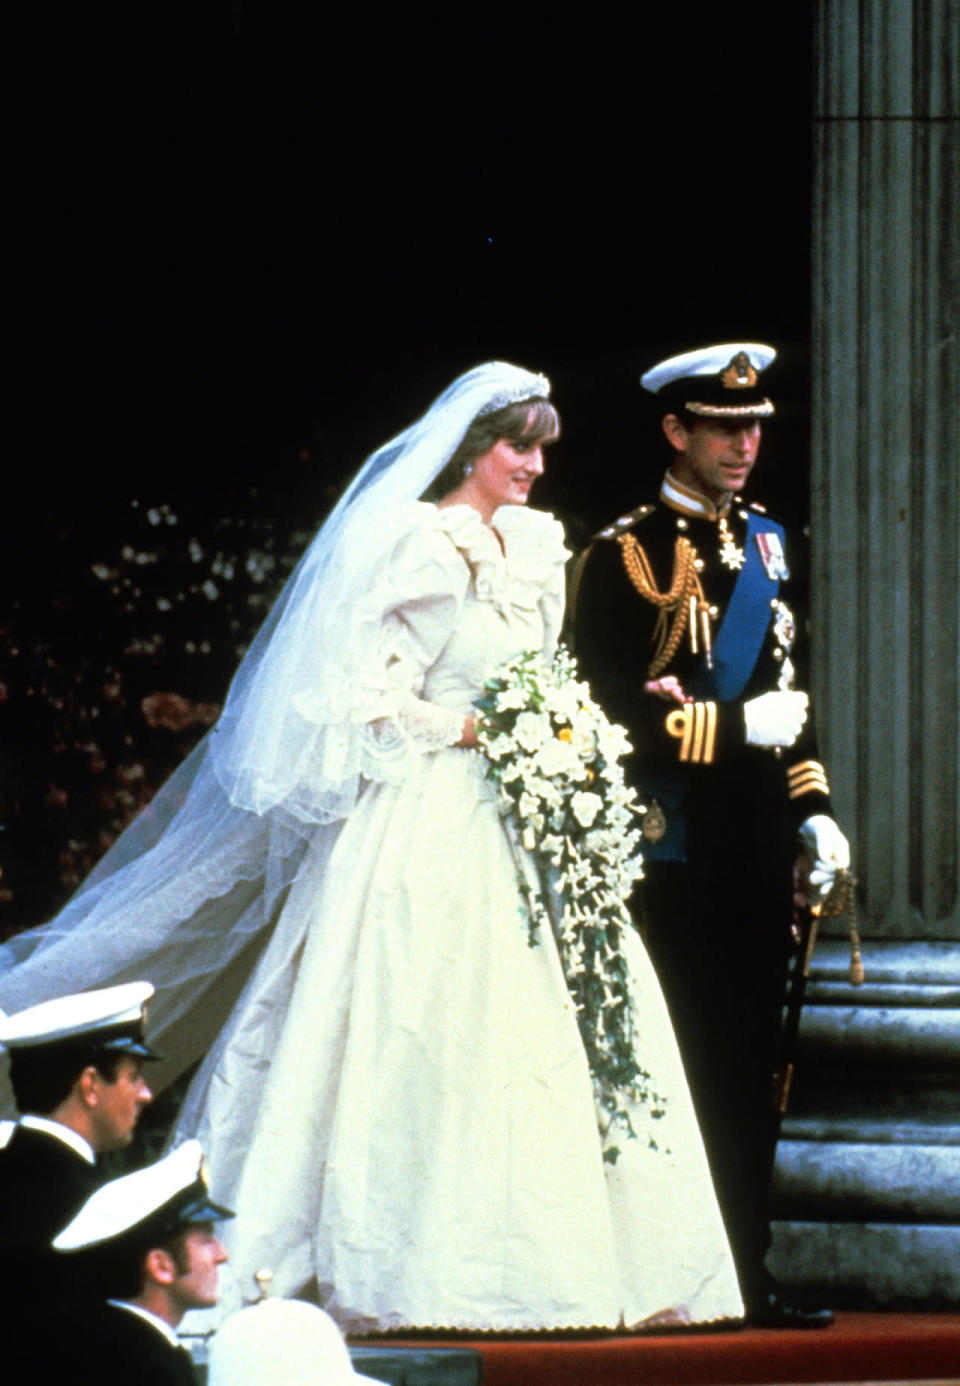 <p>Who could forget the late Princess Di’s frothy 80s bridal gown? The beloved royal tied the knot in one huge (and no doubt uncomfortable) David and Elizabeth Emanuel frock, complete with billowing sleeves, train and ruffled neck. <i>[Photo: PA Images]</i></p>